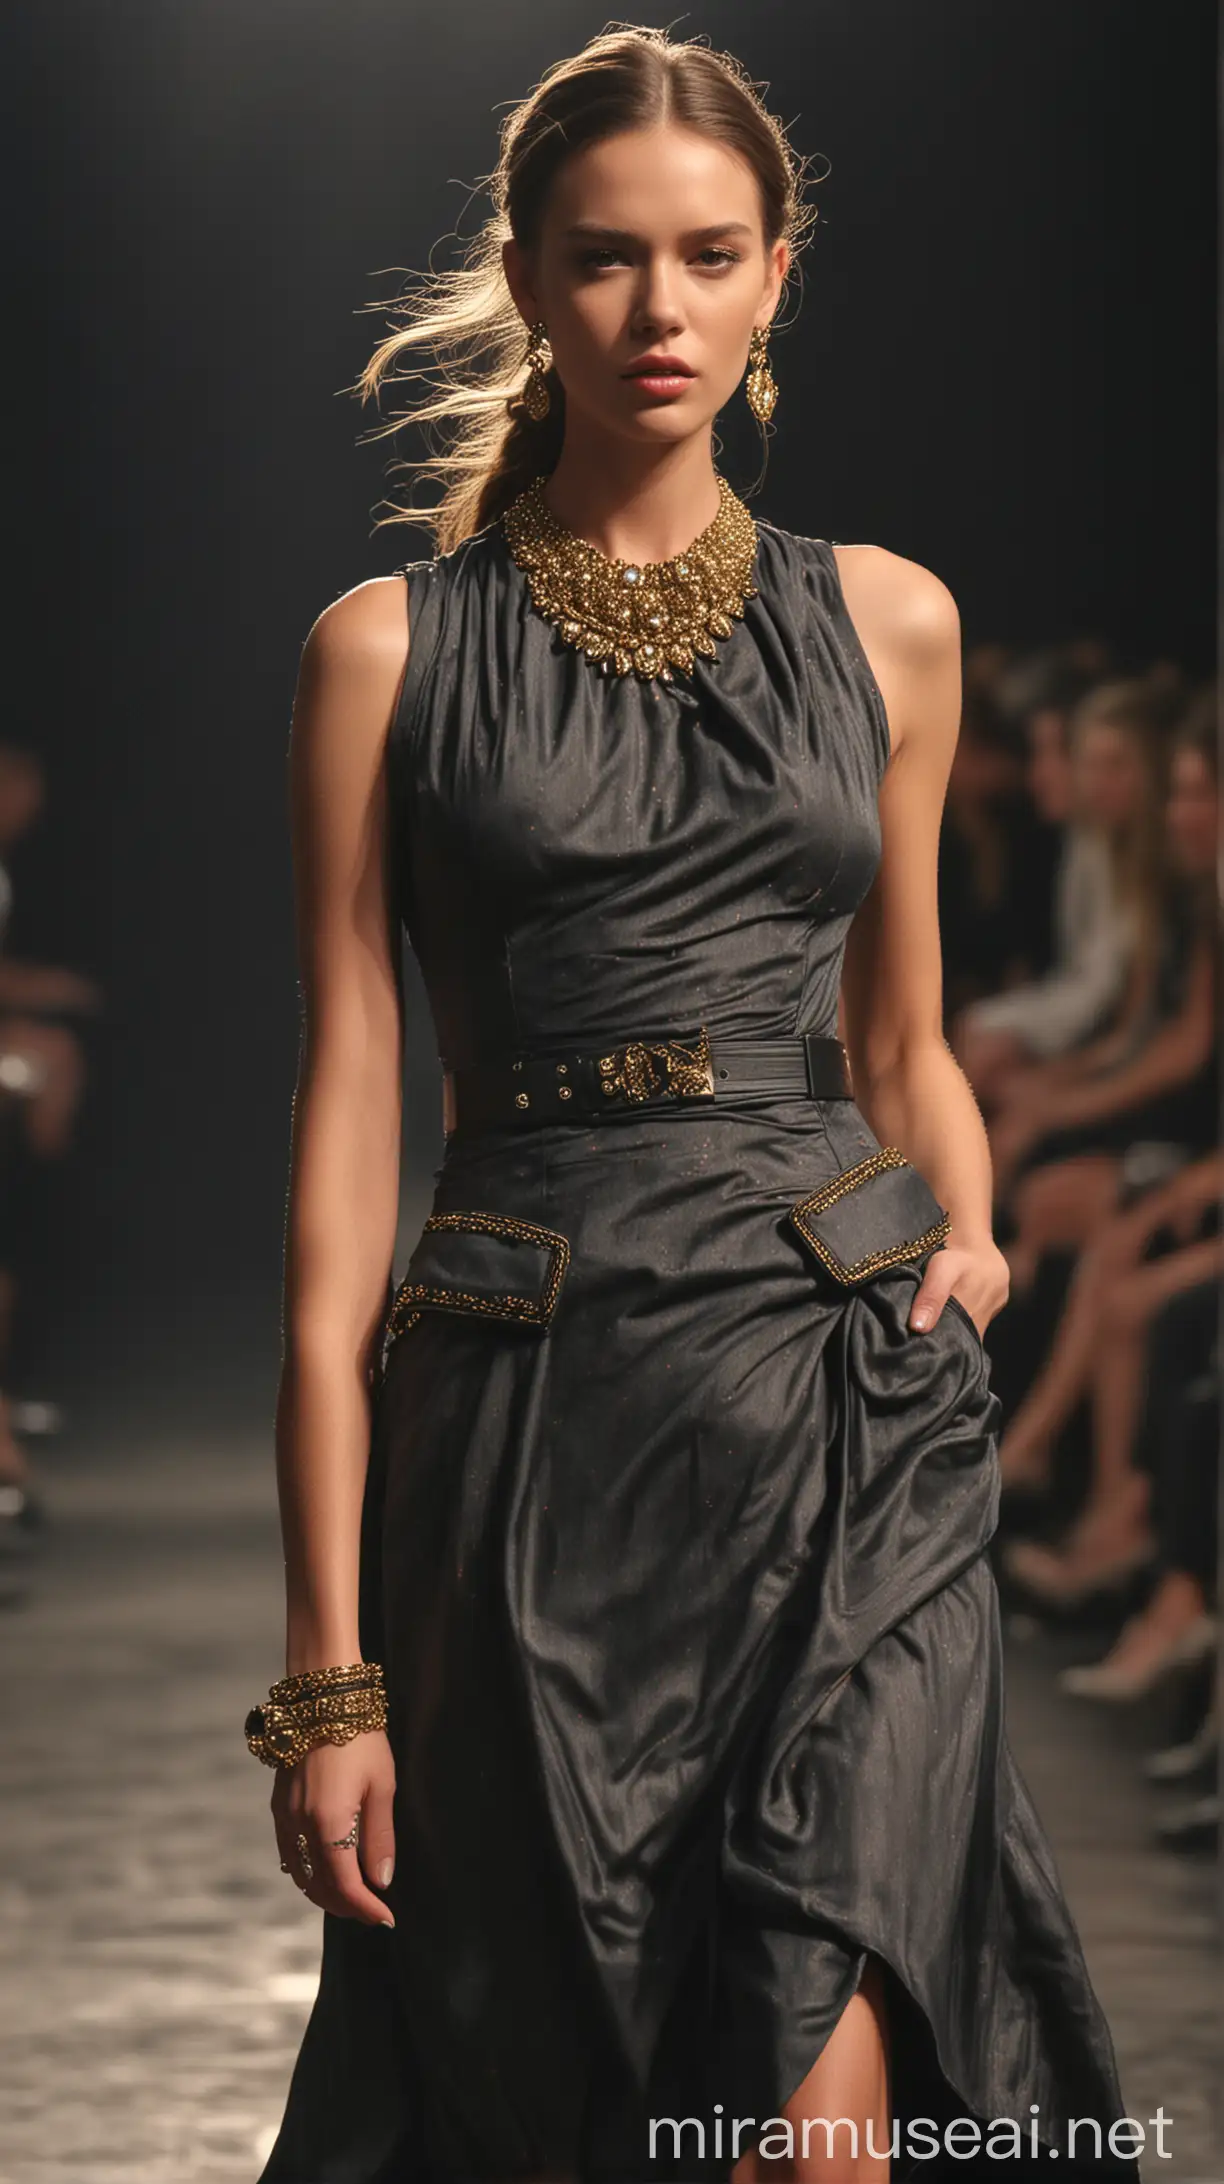 Stunning beautiful supermodel, runway motion for Montelago brand fashion show, chic large dress, front angle, hands in the pockets, wind, , black charcoal, hyper-realistic, glamorous, statement jewelry, golden hour, Alexander McQueen style 